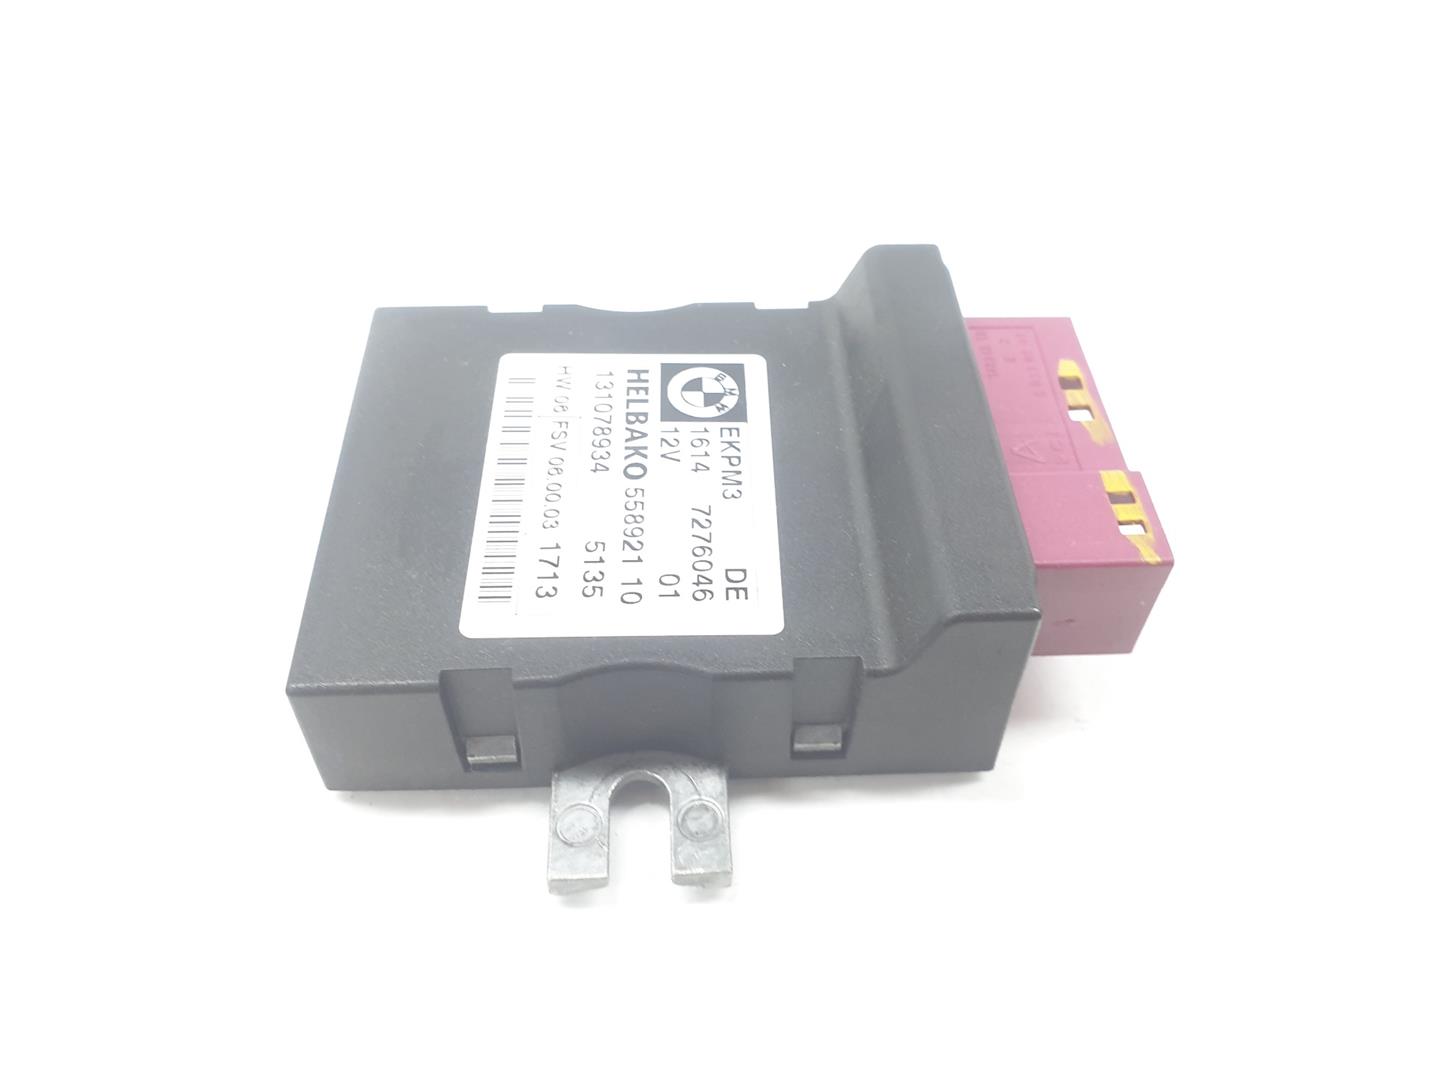 BMW X1 E84 (2009-2015) Other Control Units 16147276046, 16147276046 19898110